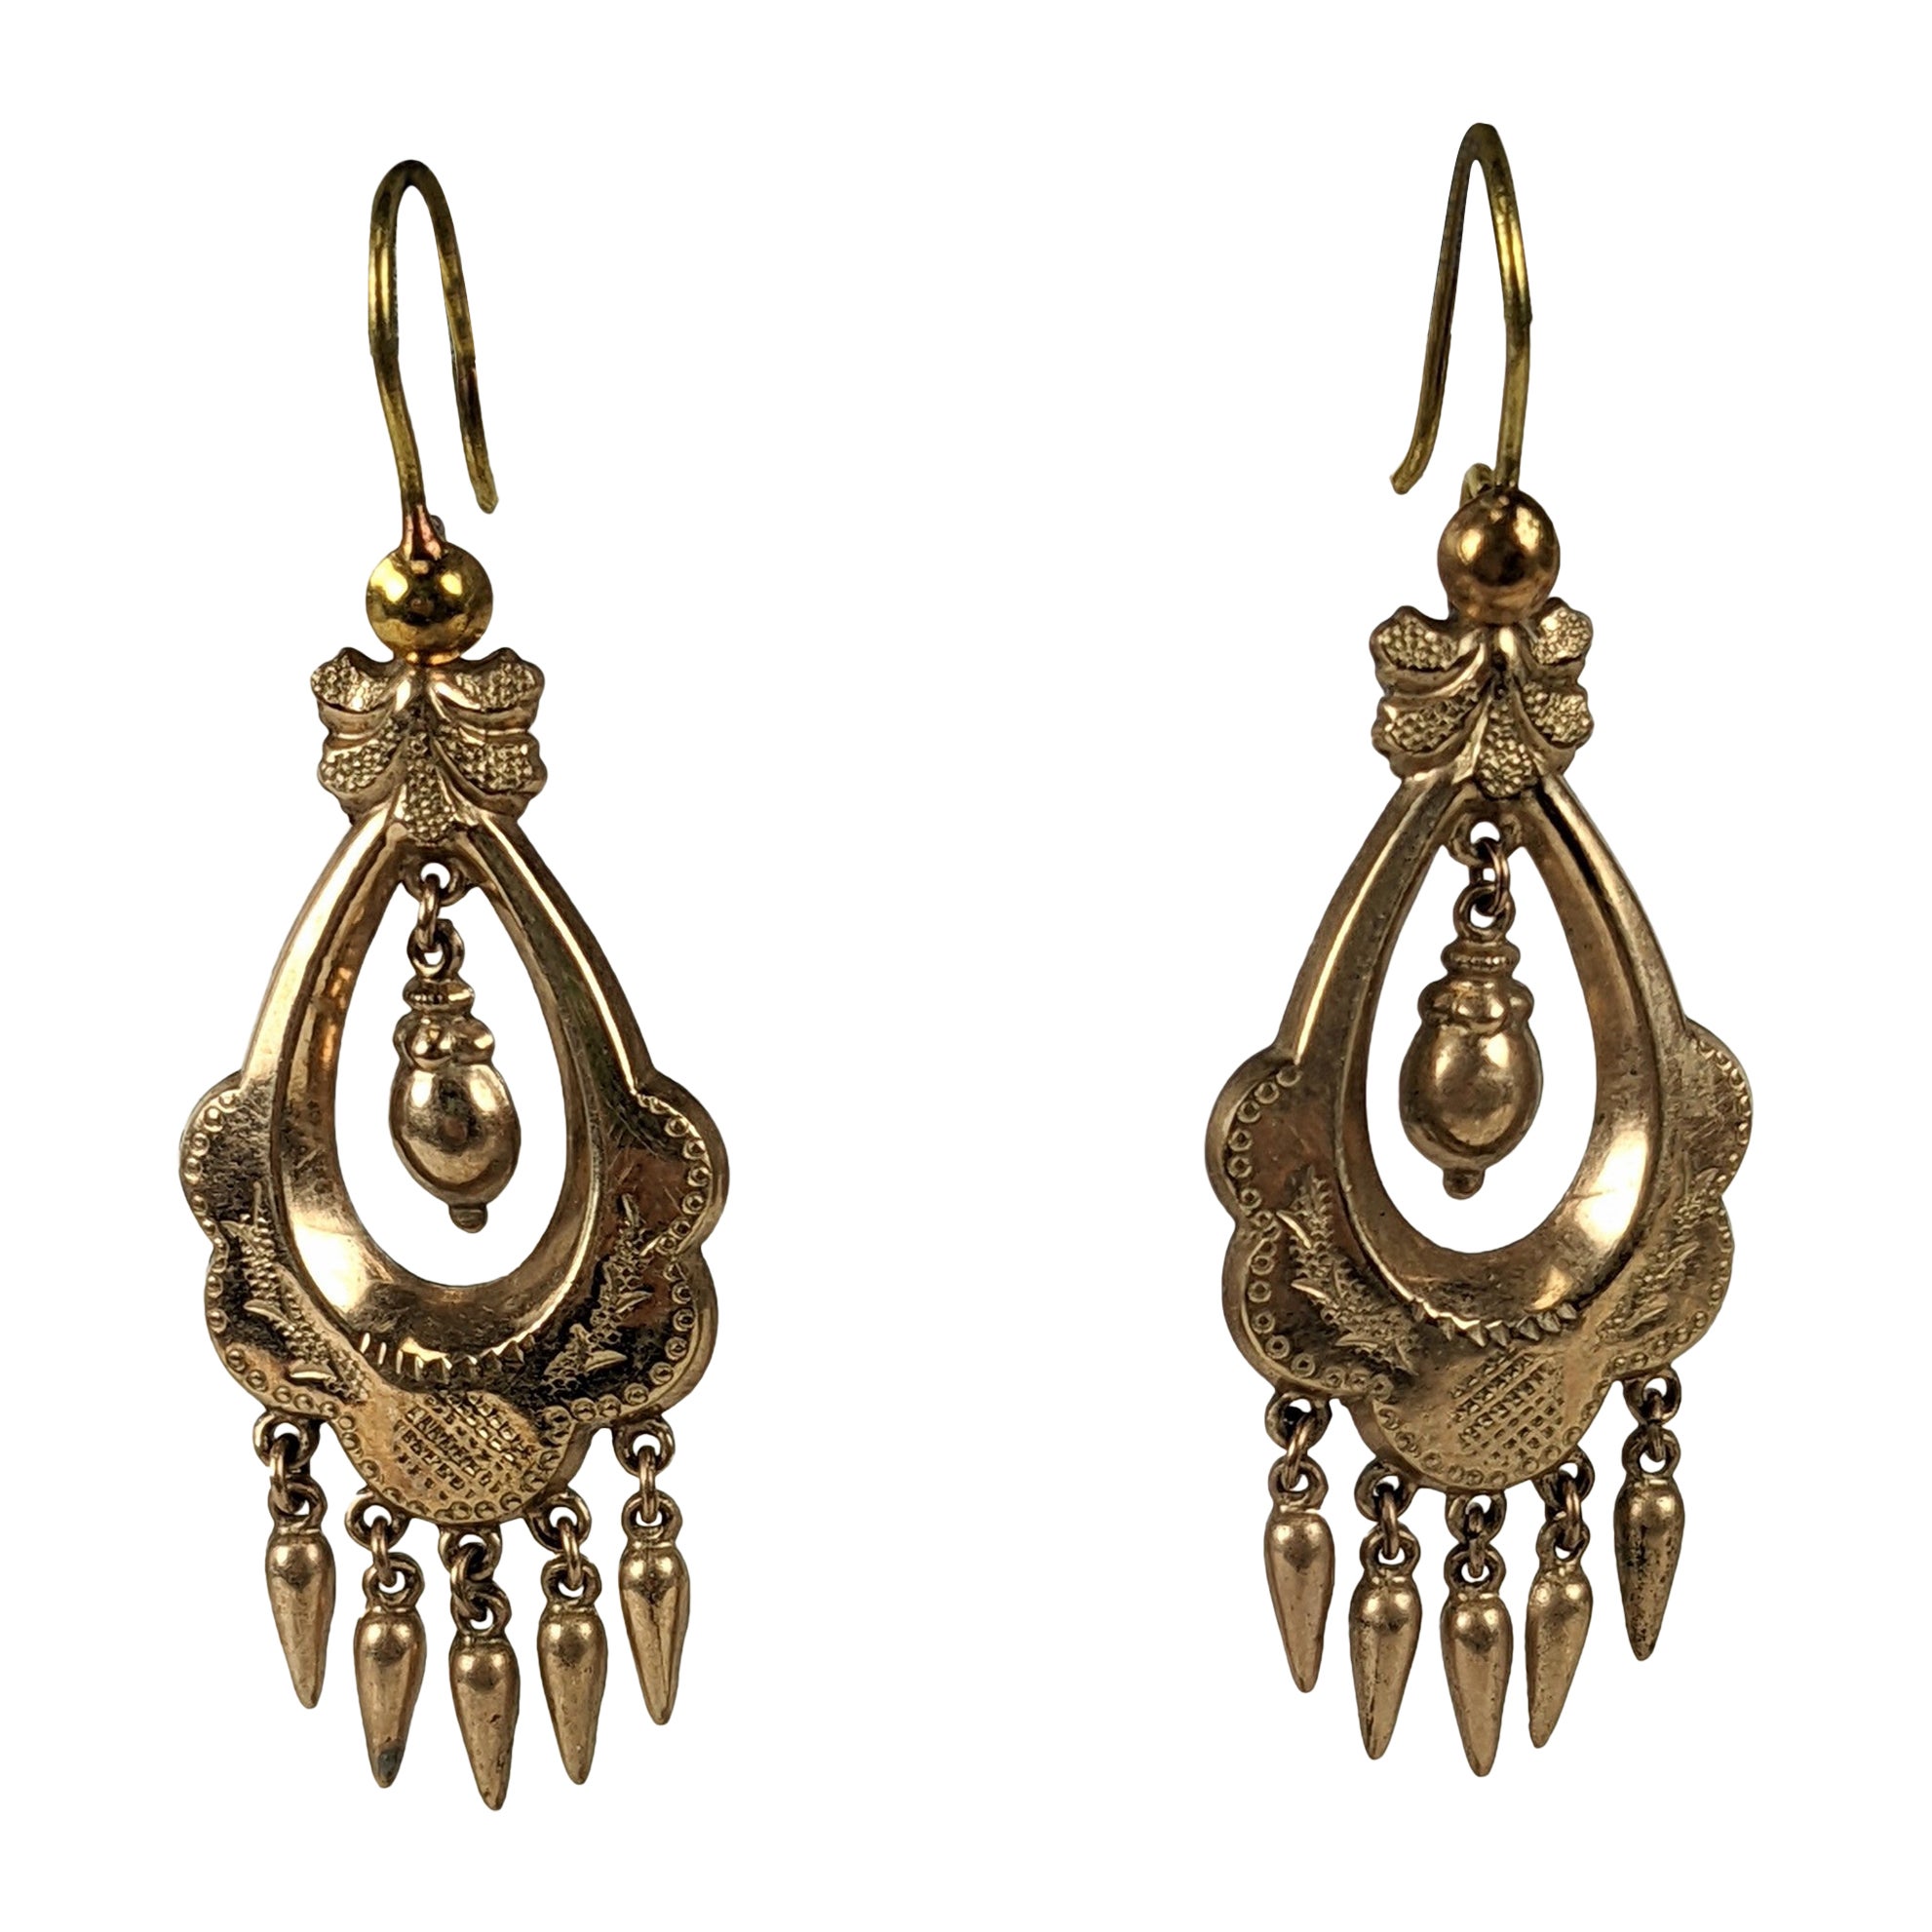 Victorian Renaissance Revival Articulated Long Earrings For Sale